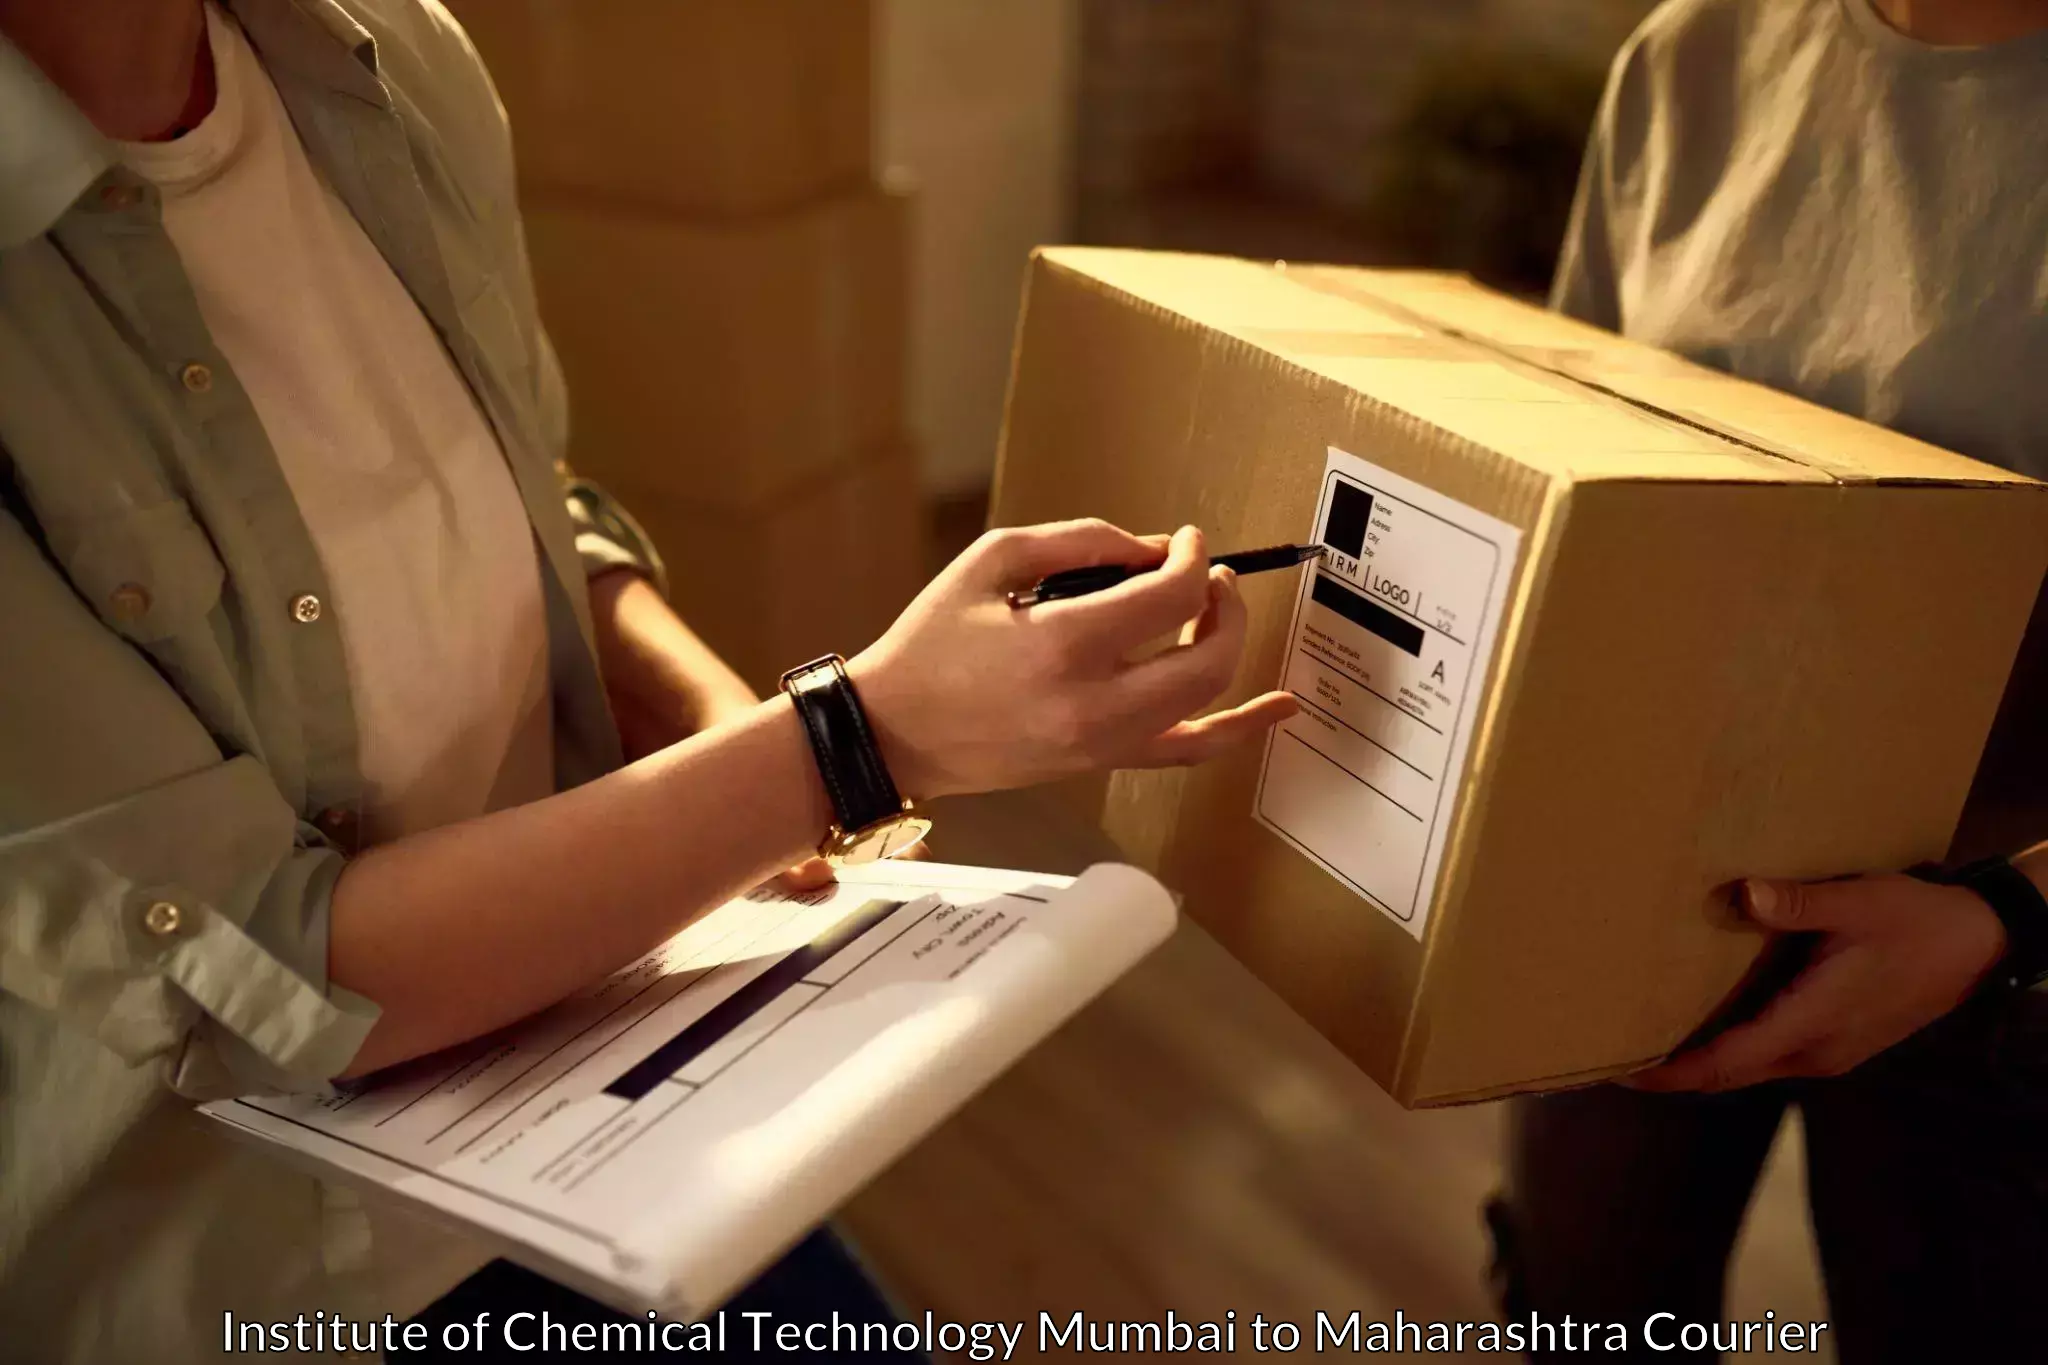 Urban courier service Institute of Chemical Technology Mumbai to Dusarbid